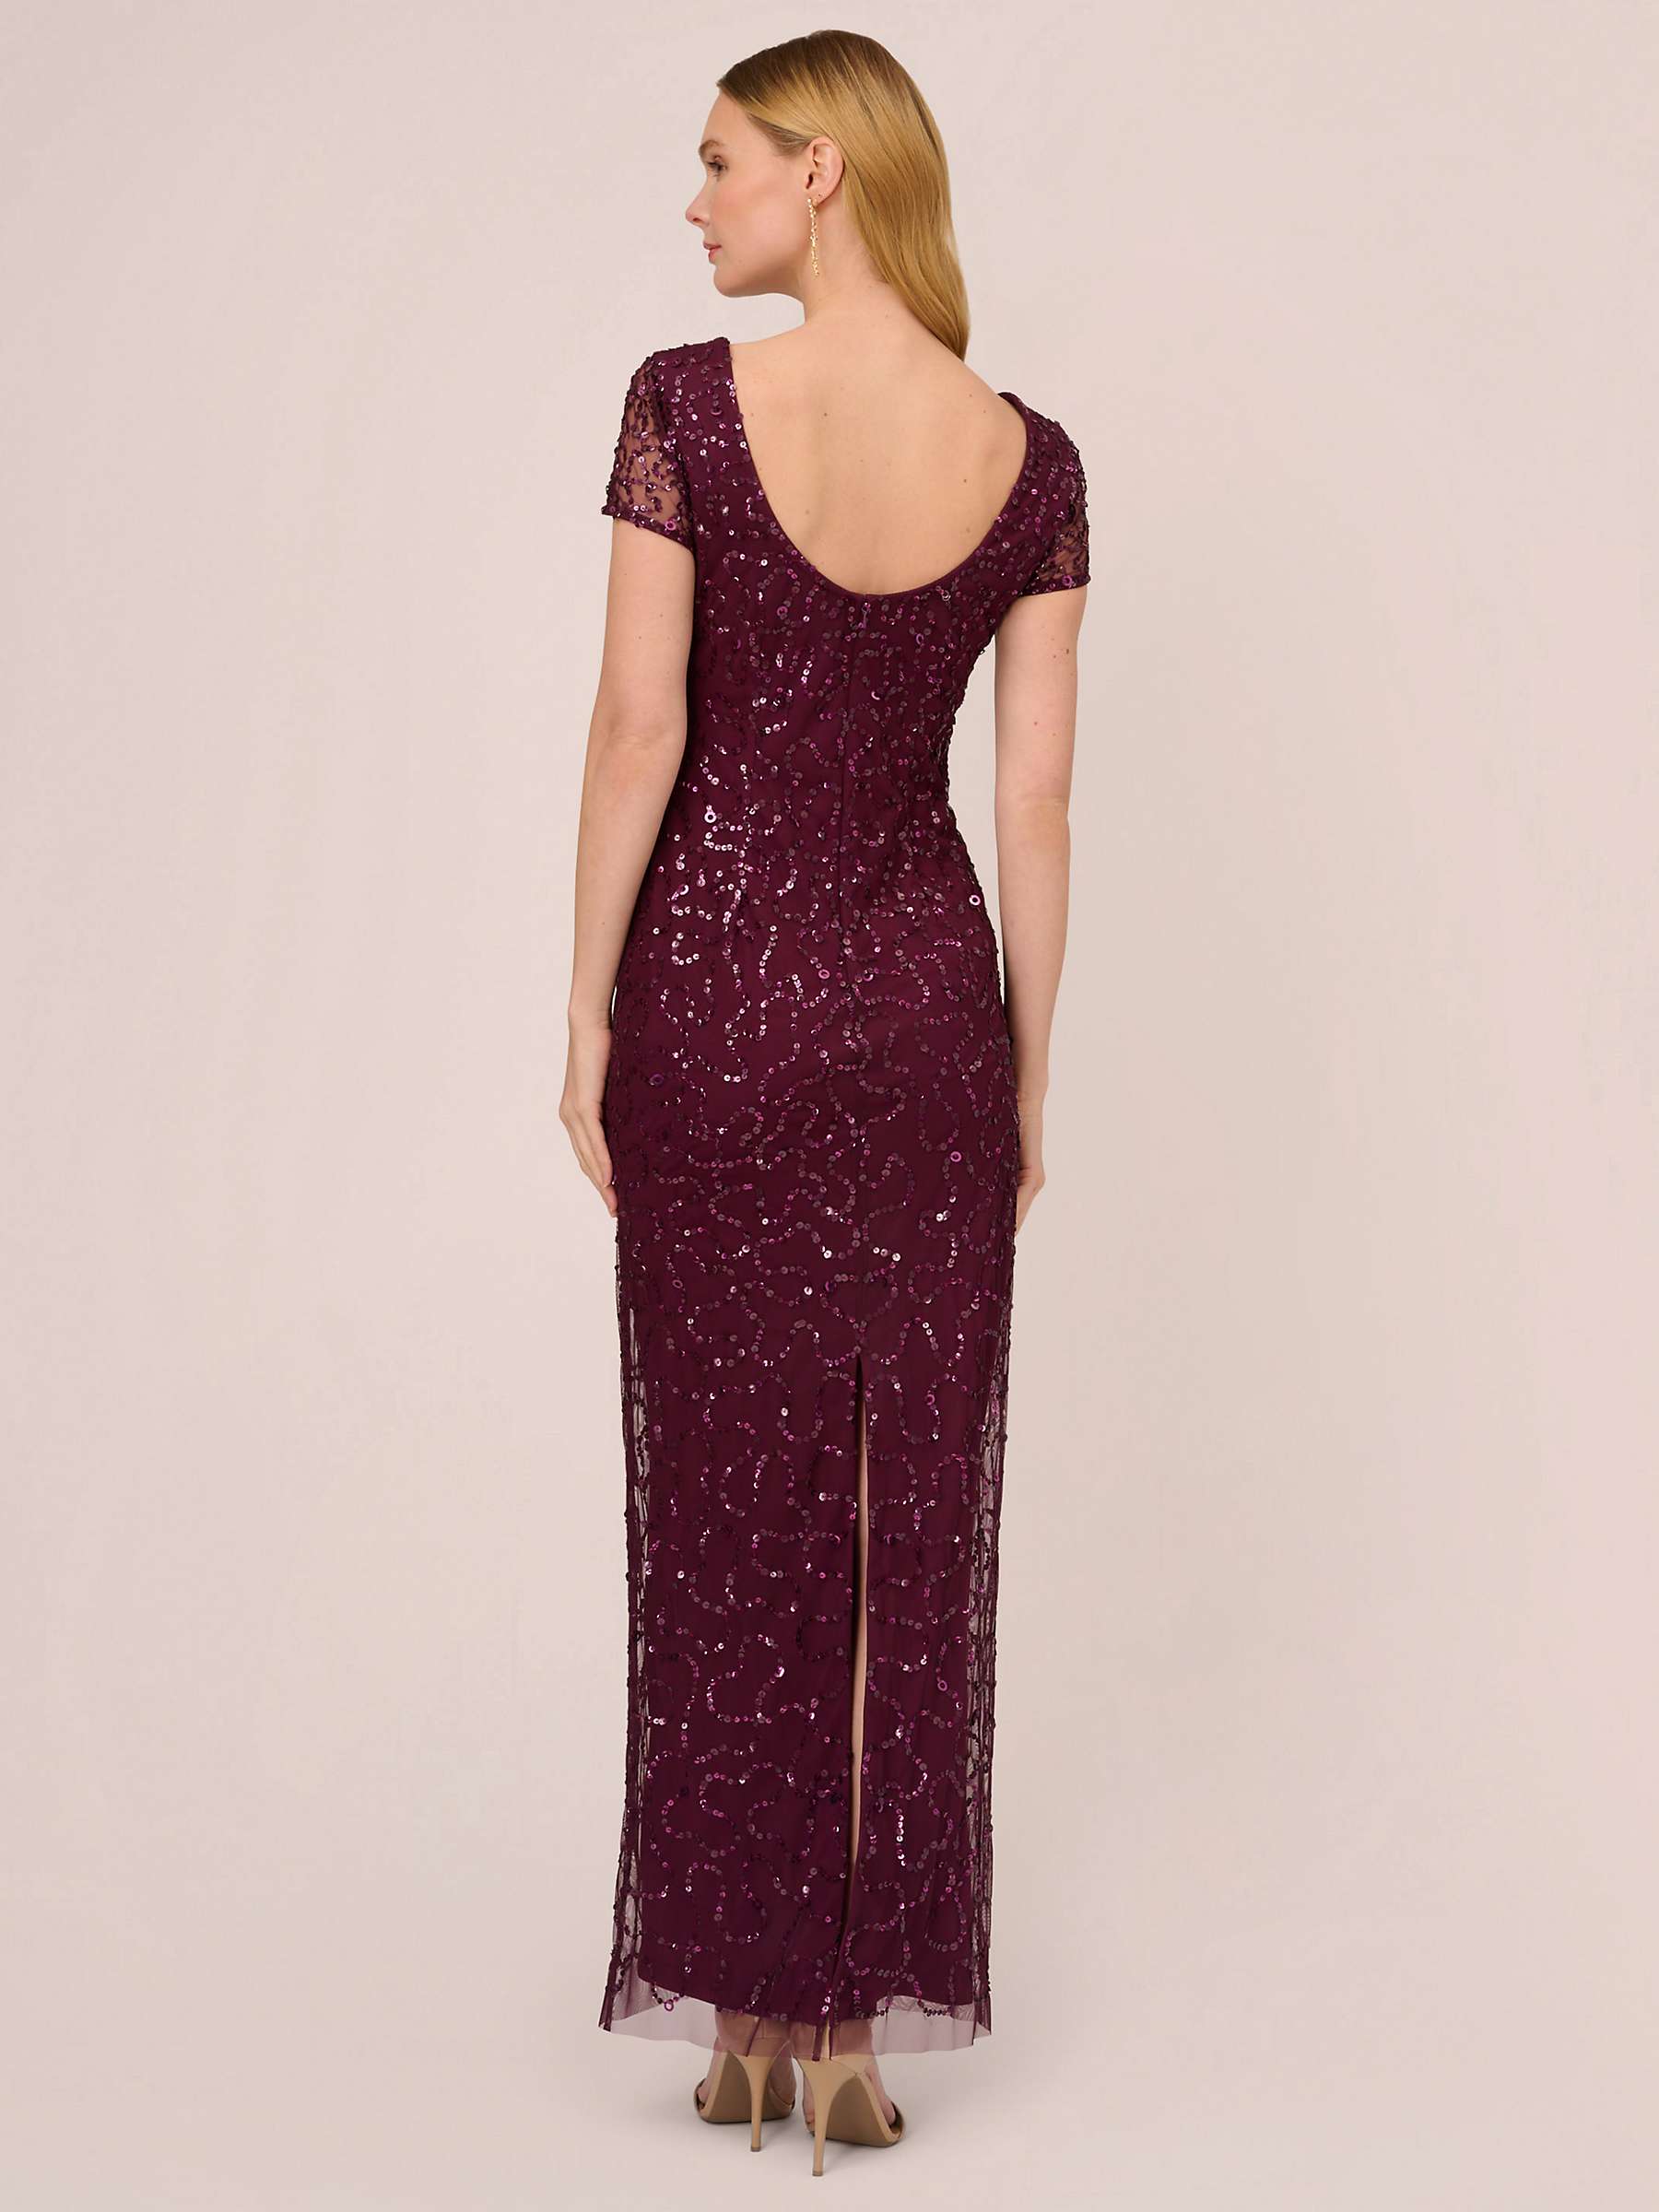 Buy Adrianna Papell Papell Studio Beaded Illusion Sleeve Gown Online at johnlewis.com